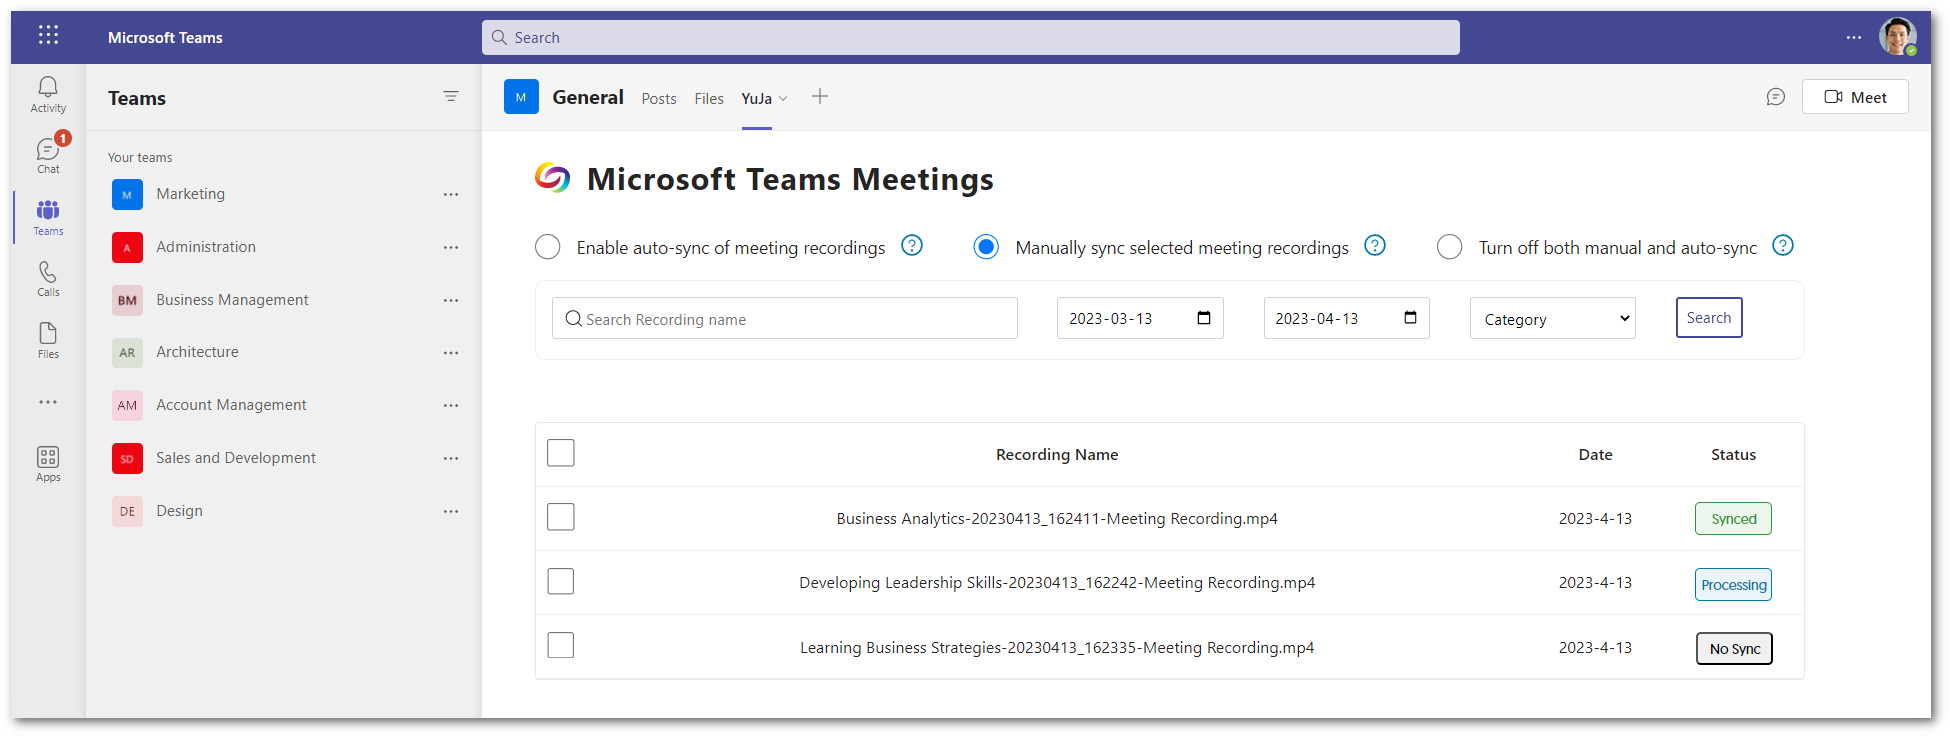 The YuJa app is featured within Microsoft Teams. The app features a table with a list of recordings, and options to automatically or manually sync recordings.